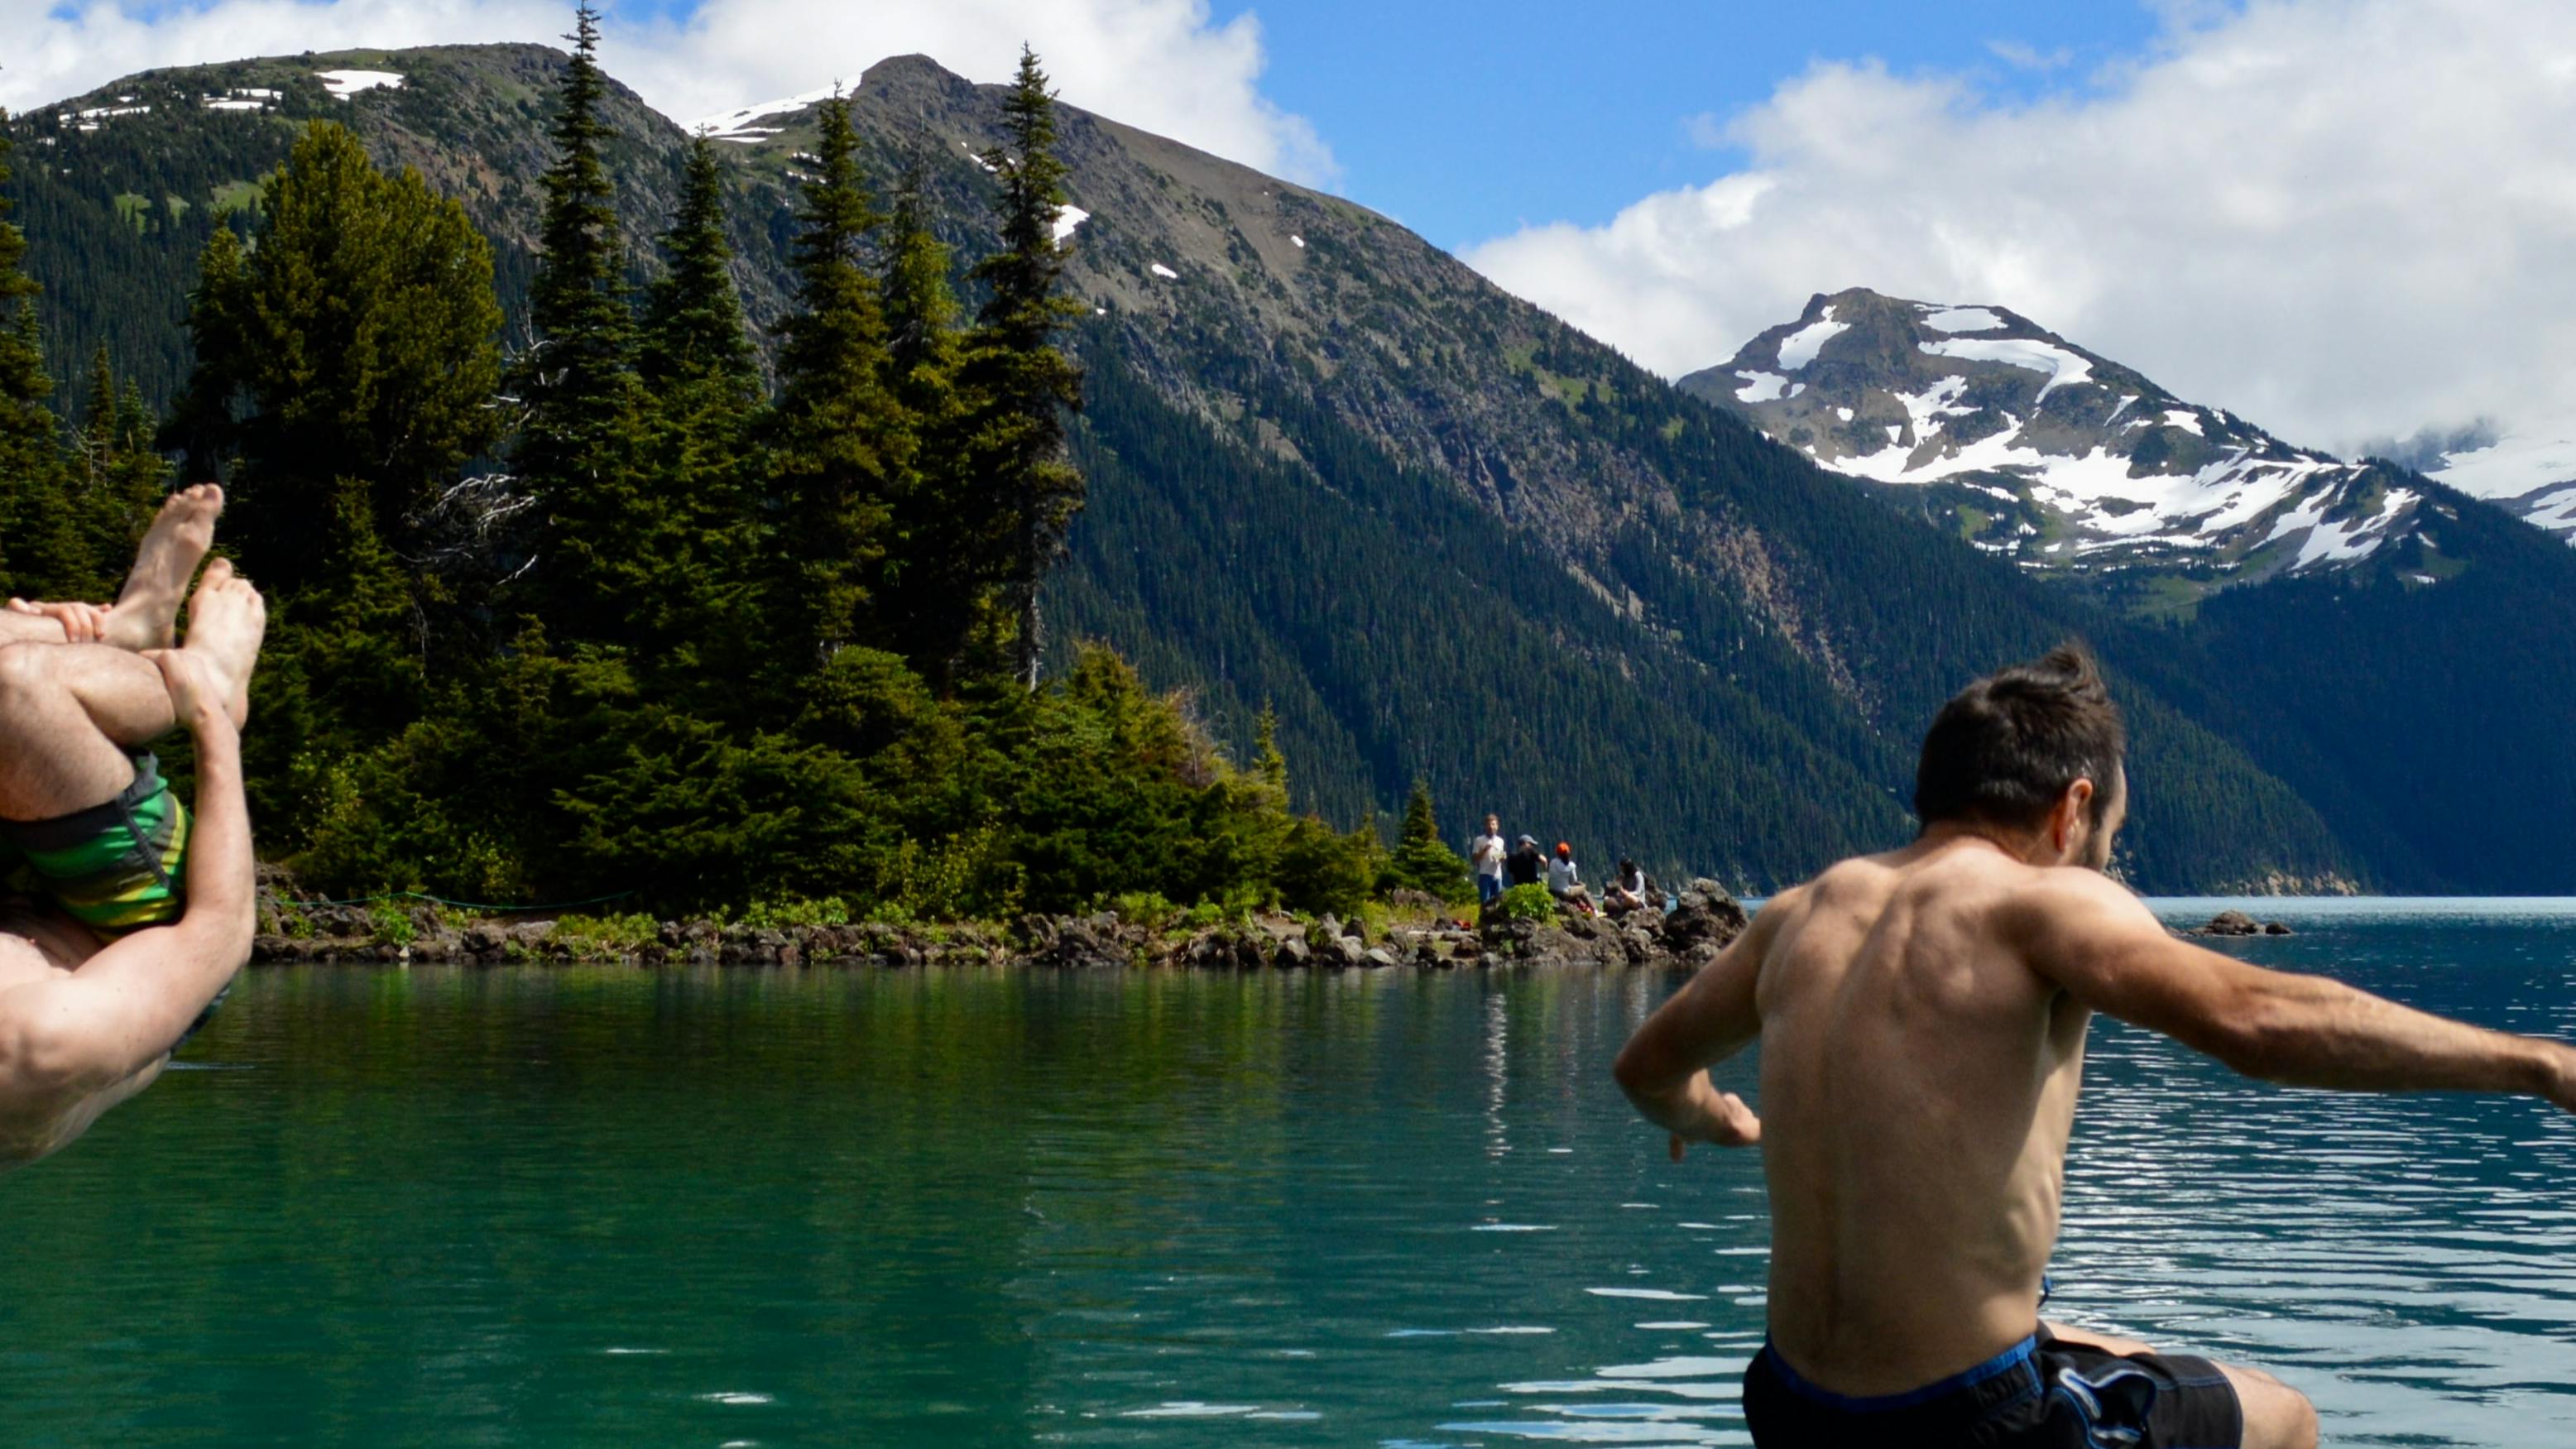 Two men jump into a lake. There are snow-topped mountains in the background. 